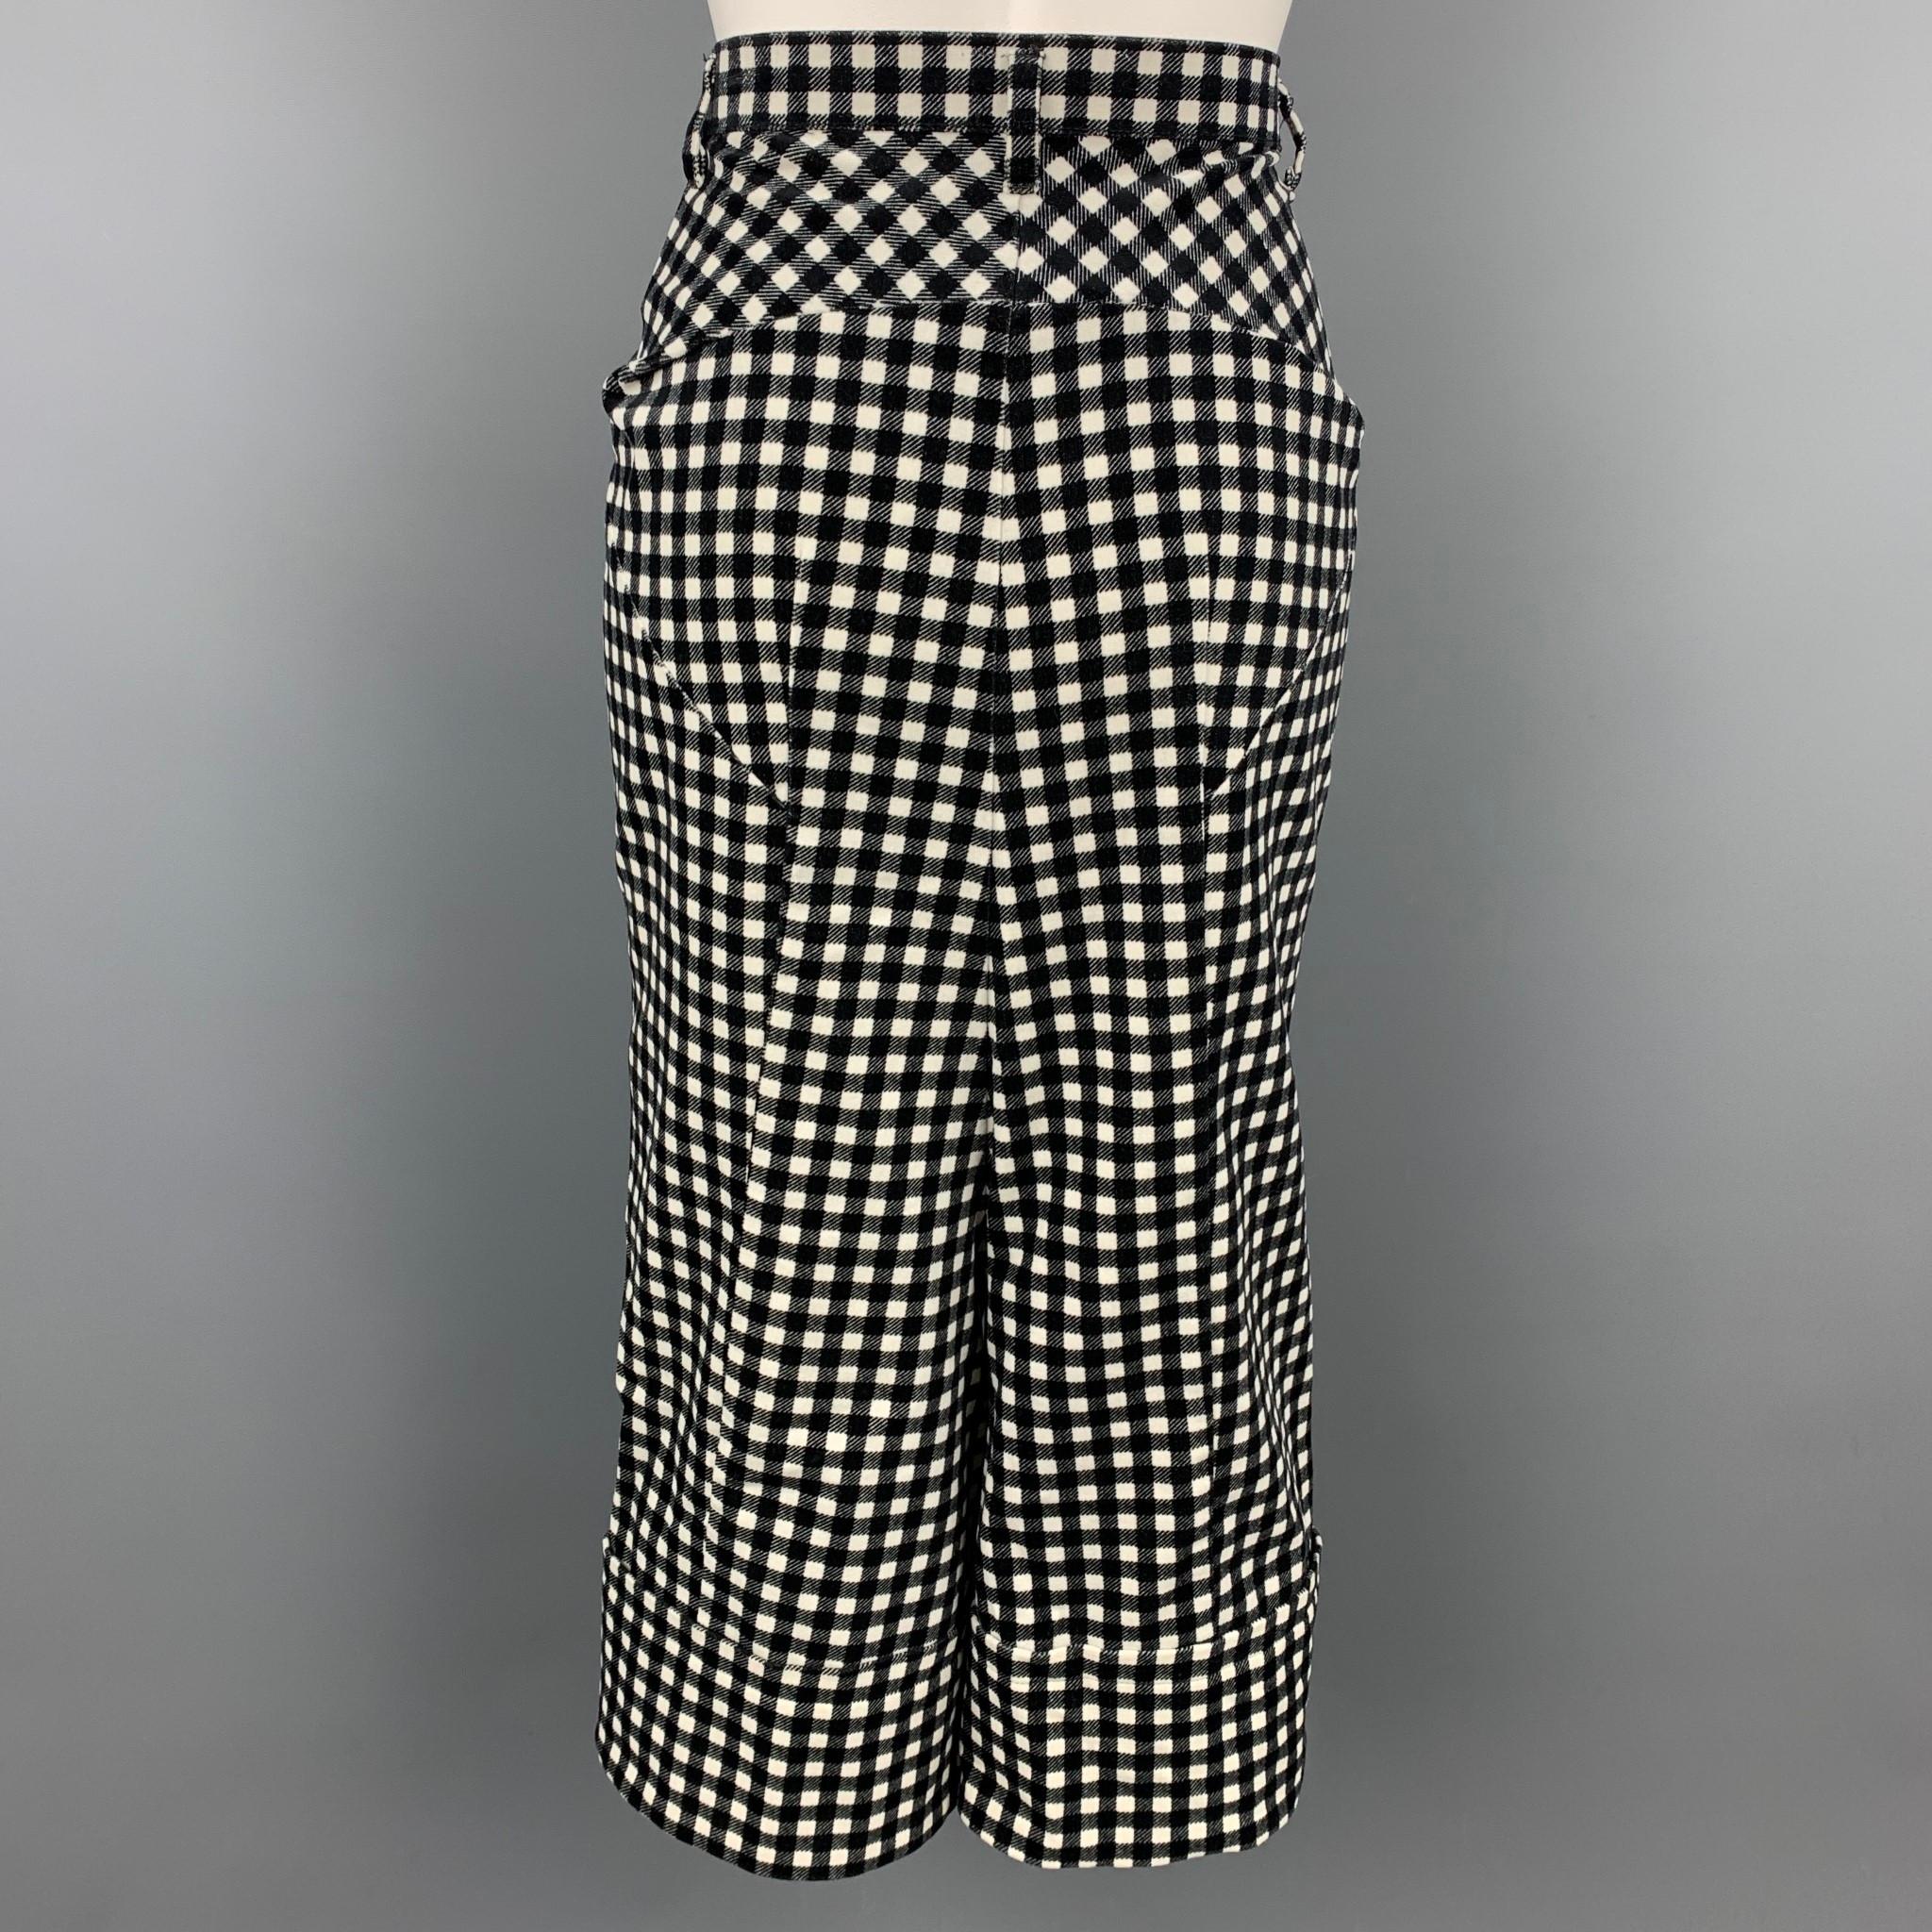 COMME des GARCONS TRICOT casual pants comes in a black & white checkered gingham velvet featuring a drop crotch style, wide leg, and a zip fly closure. Made in Japan.

Very Good  Pre-Owned Condition.
Marked: S / AD2014

Measurements:

Waist:  28